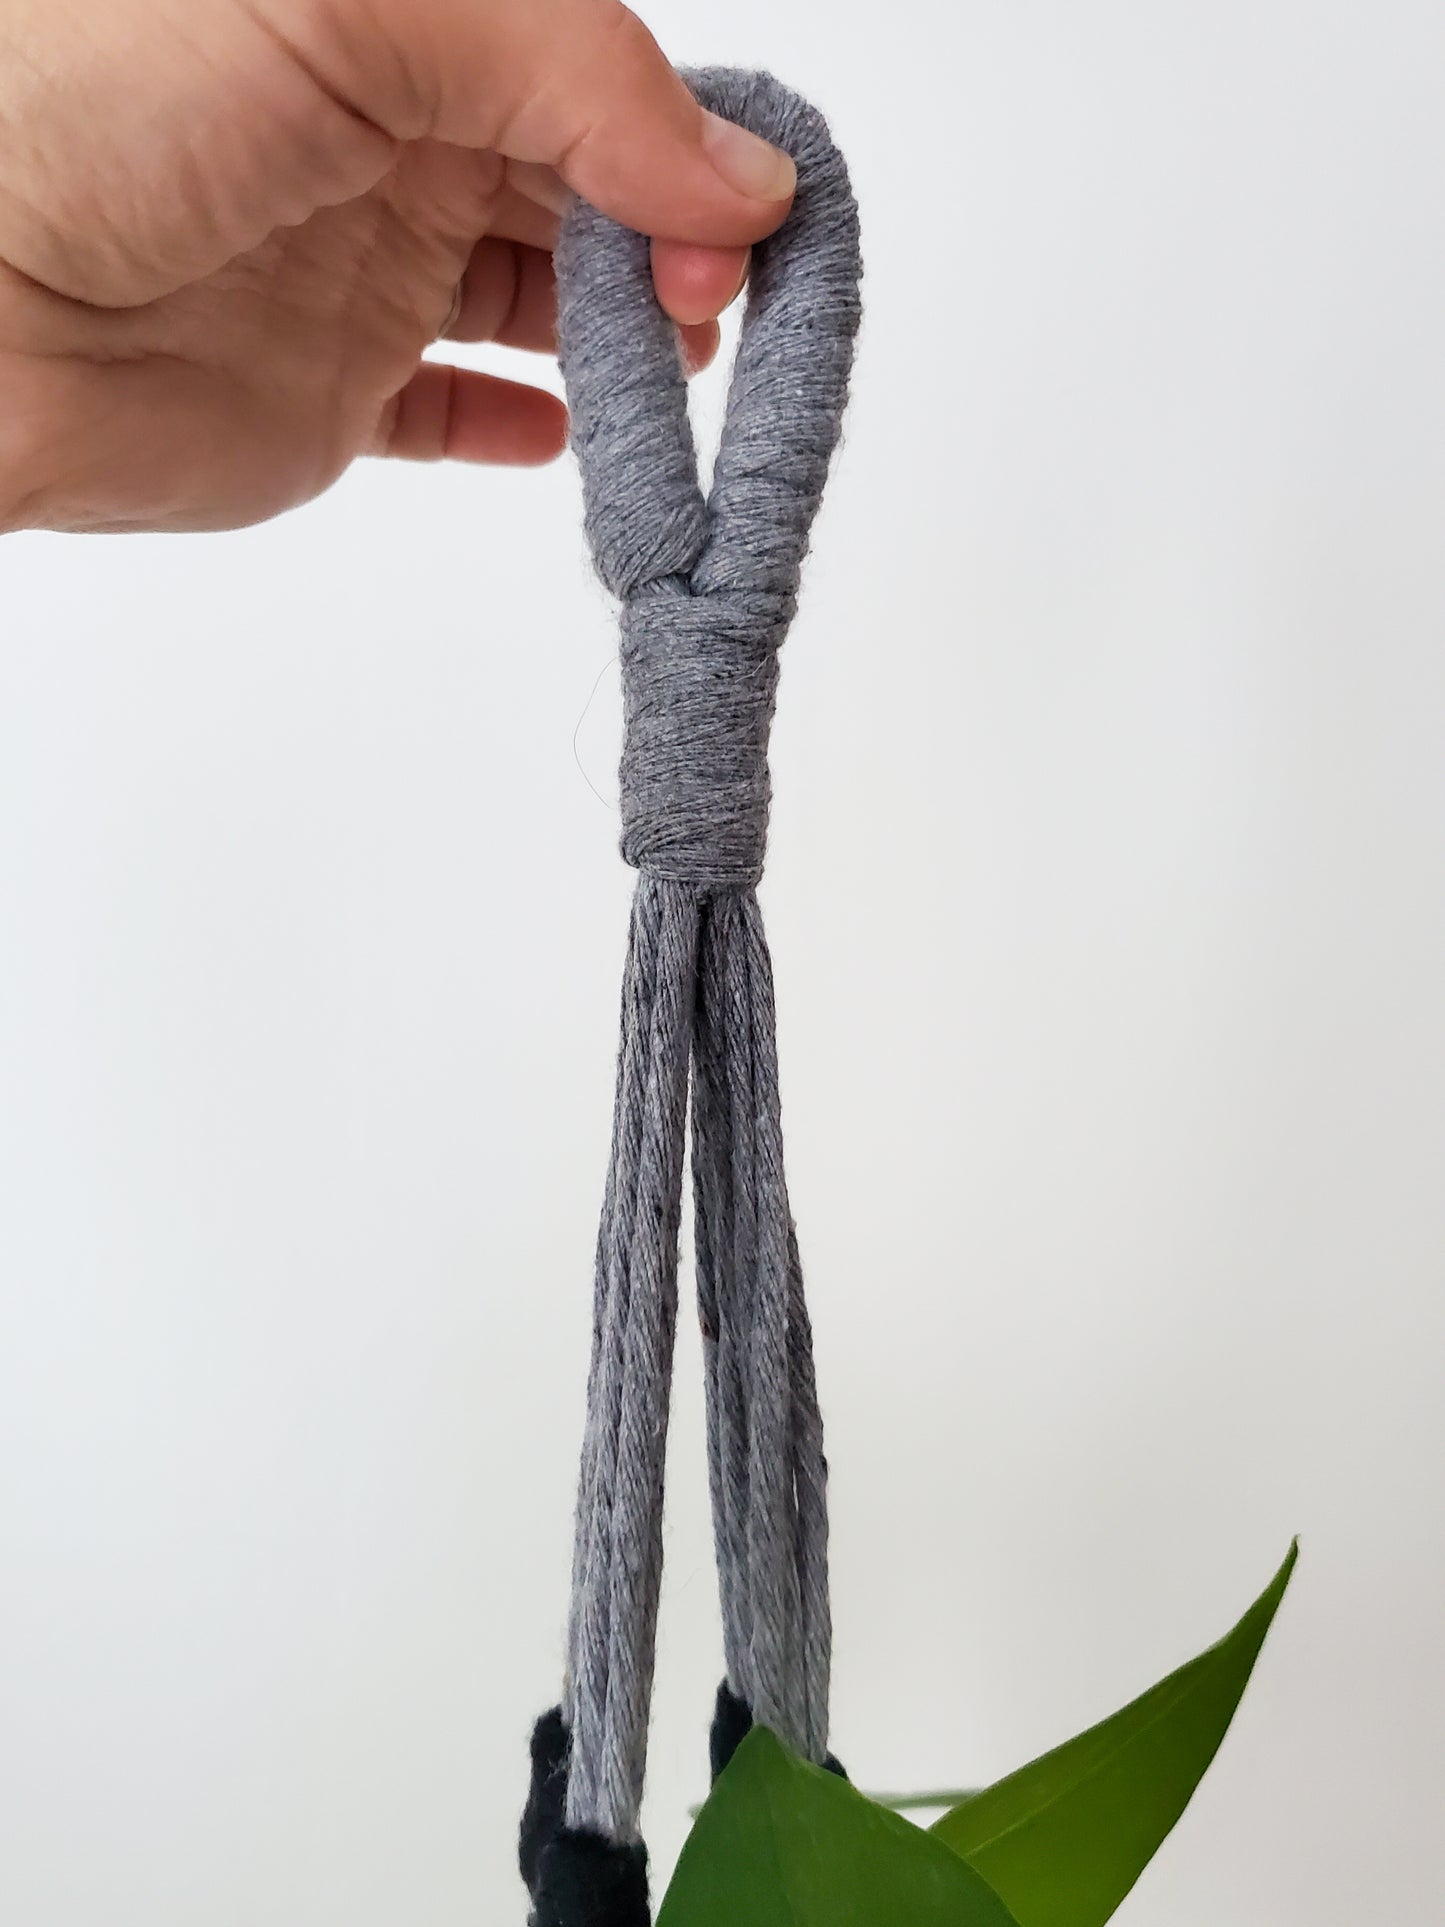 Macrame BOHO plant hanger with tassel, 30 in. More colors available. Recycled cotton, zero waste packaging